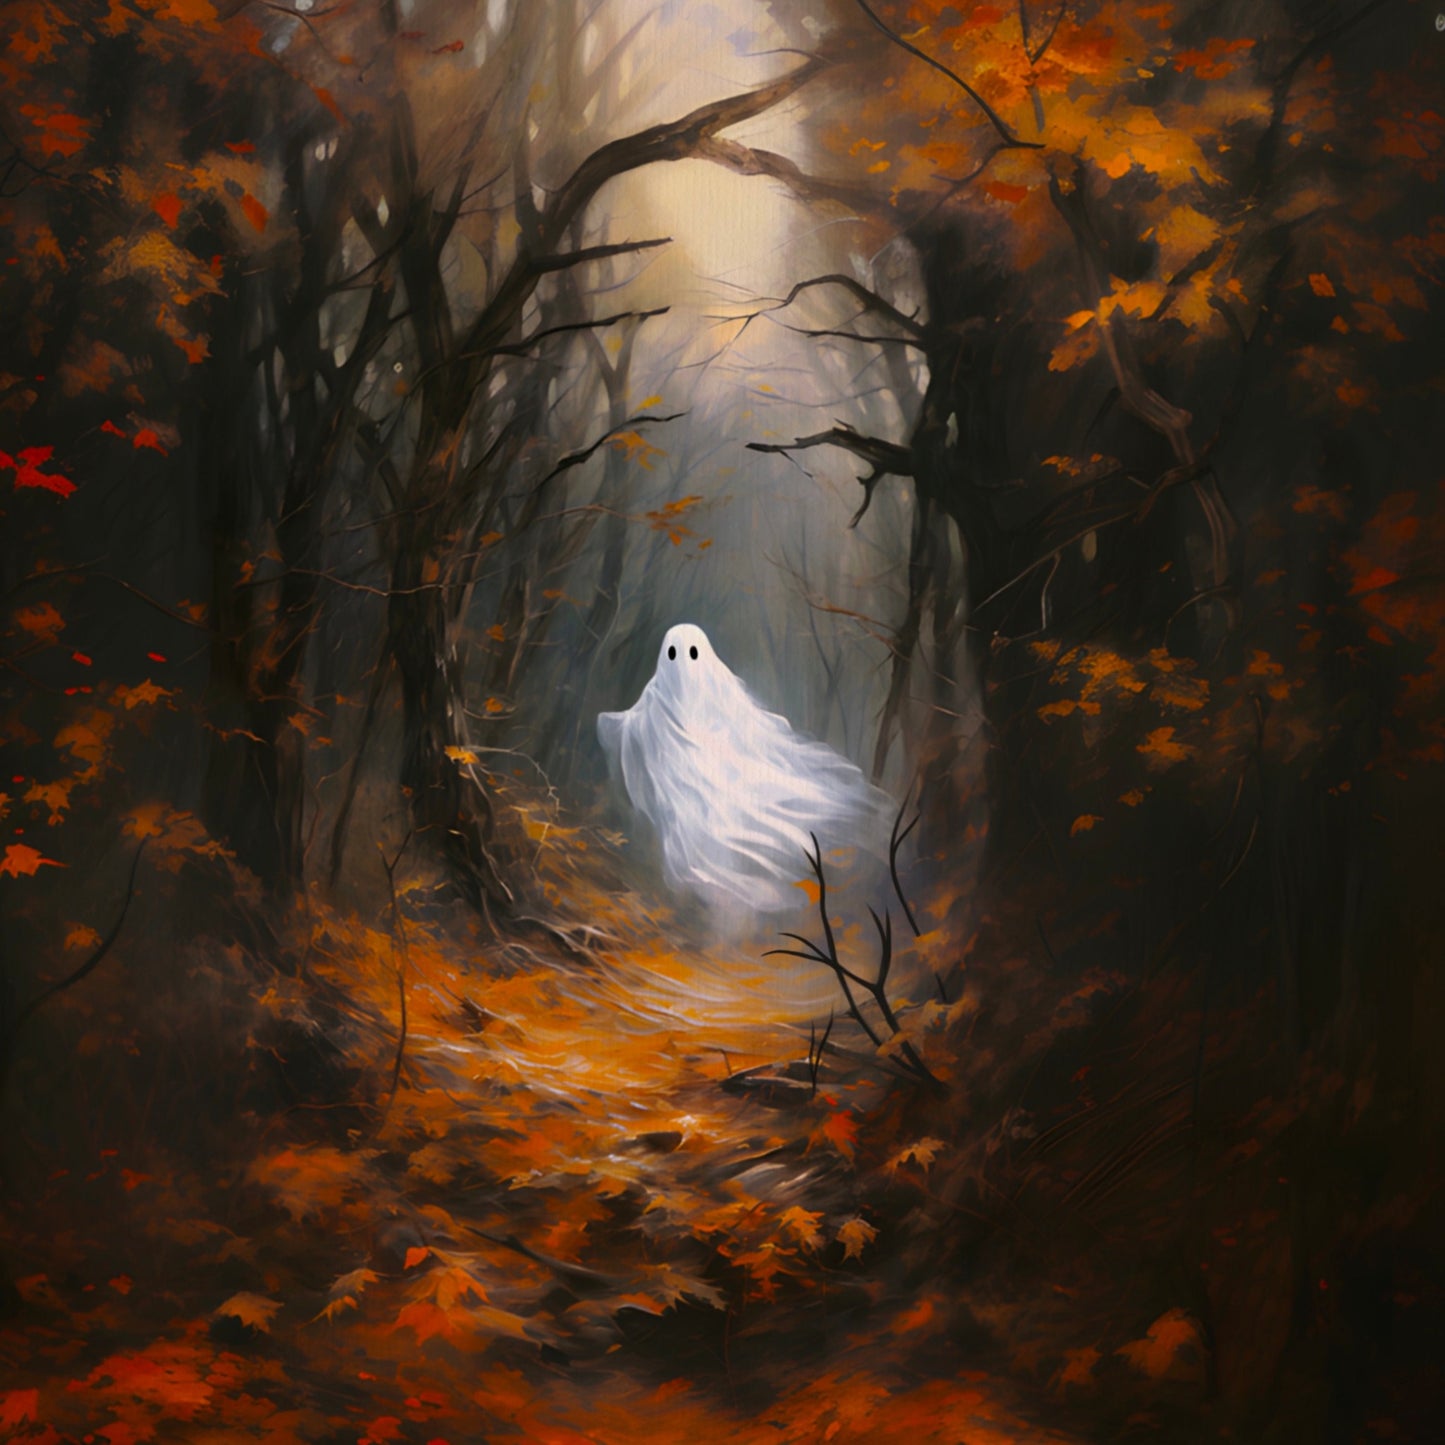 Ghost in an Autumn Forest